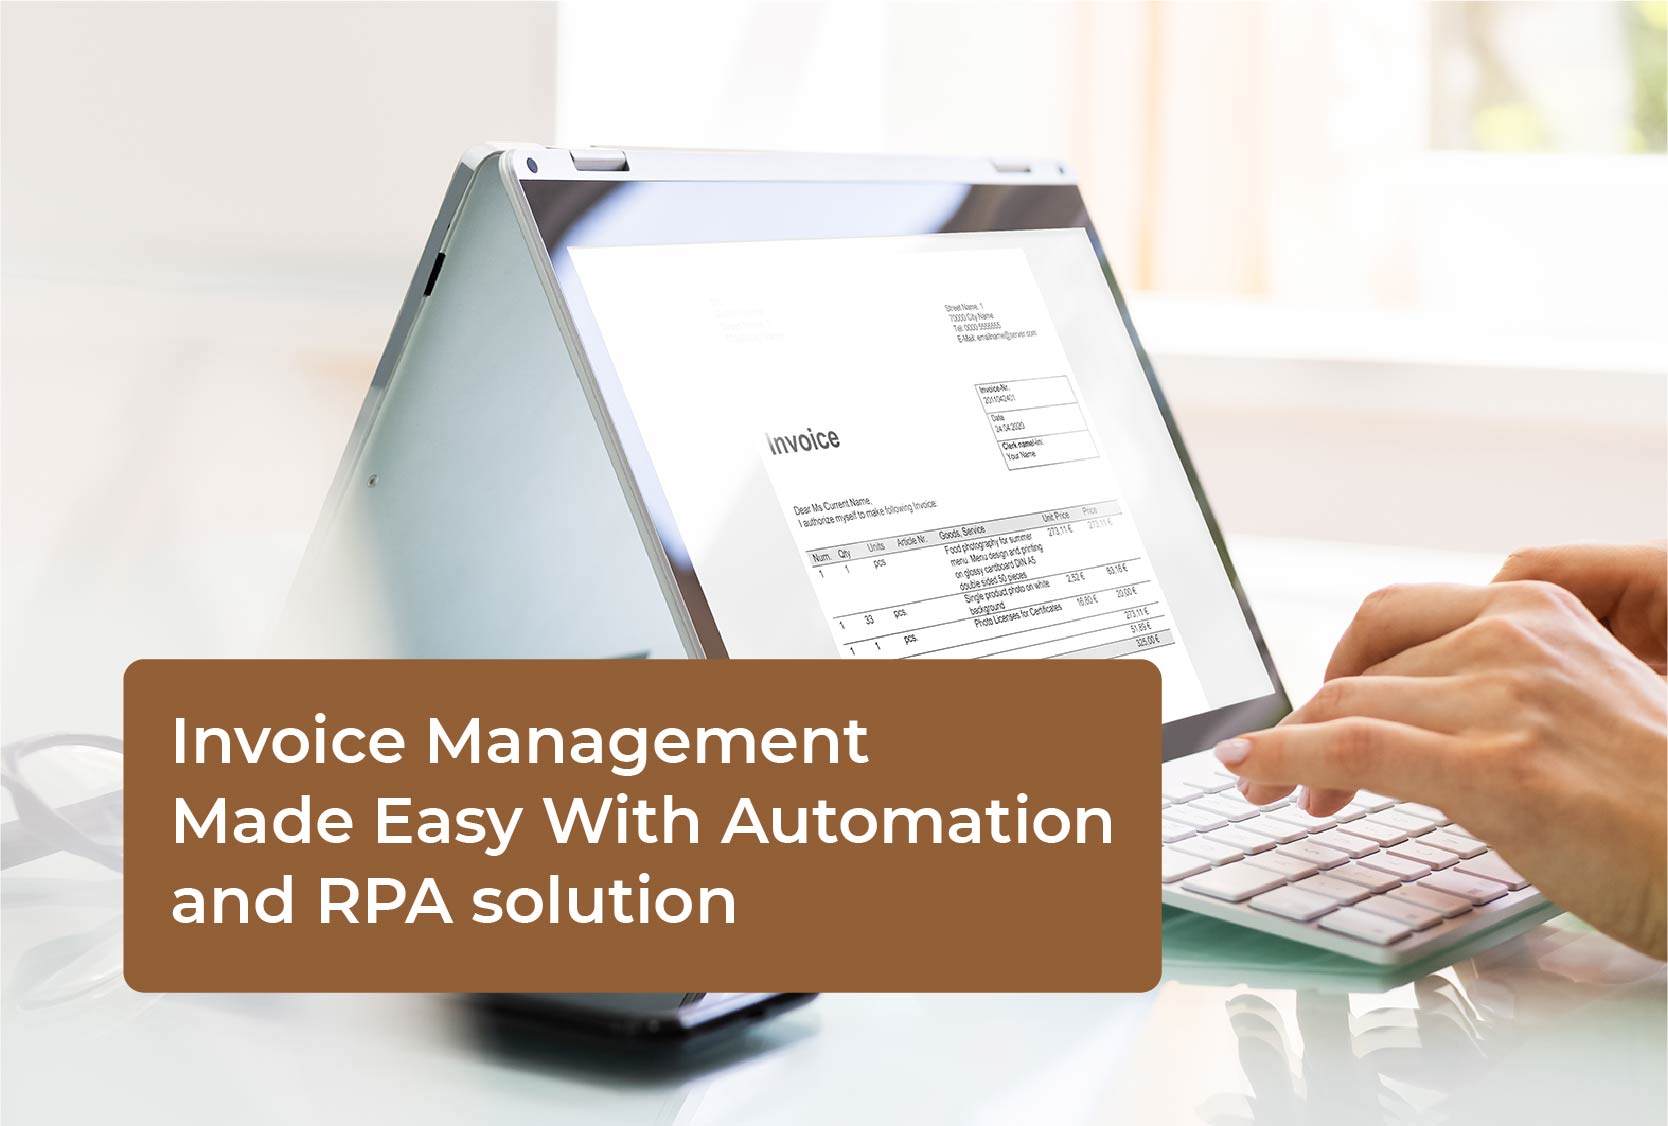 Invoice Management Made Easy With Automation and RPA solution